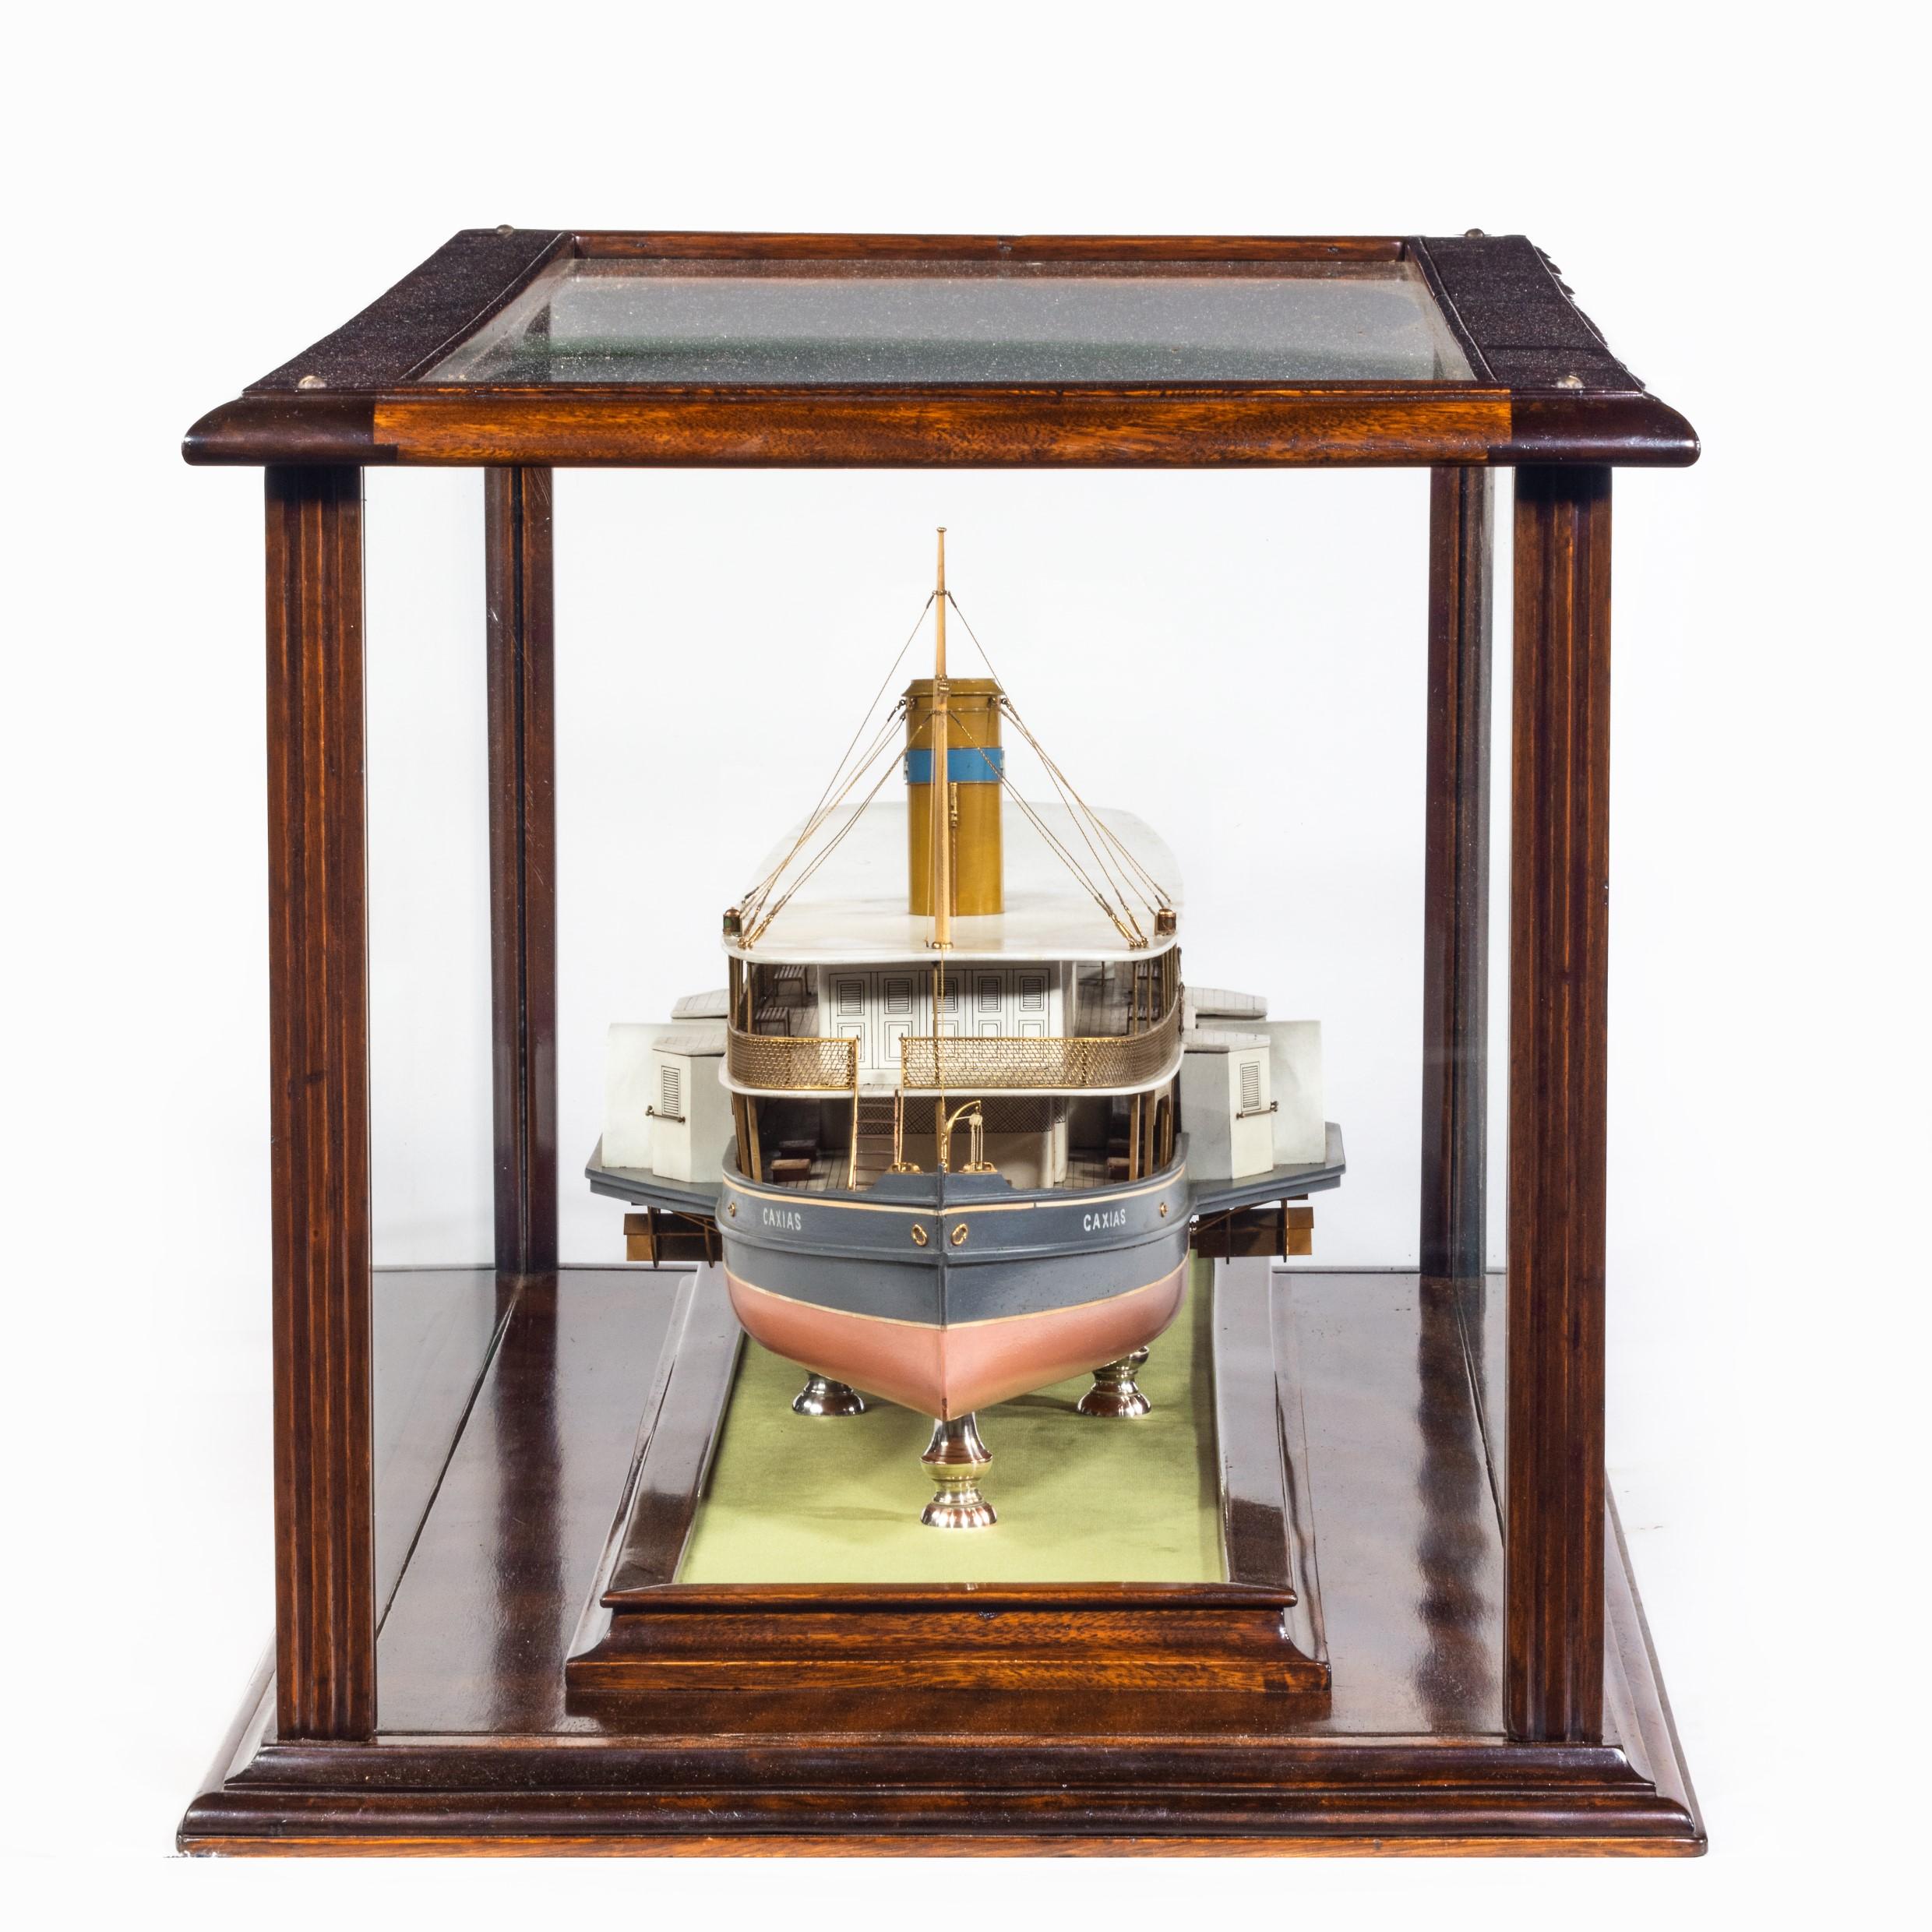 English Builder’s Model of the Brazilian Passenger Paddle Steamer Caxias For Sale